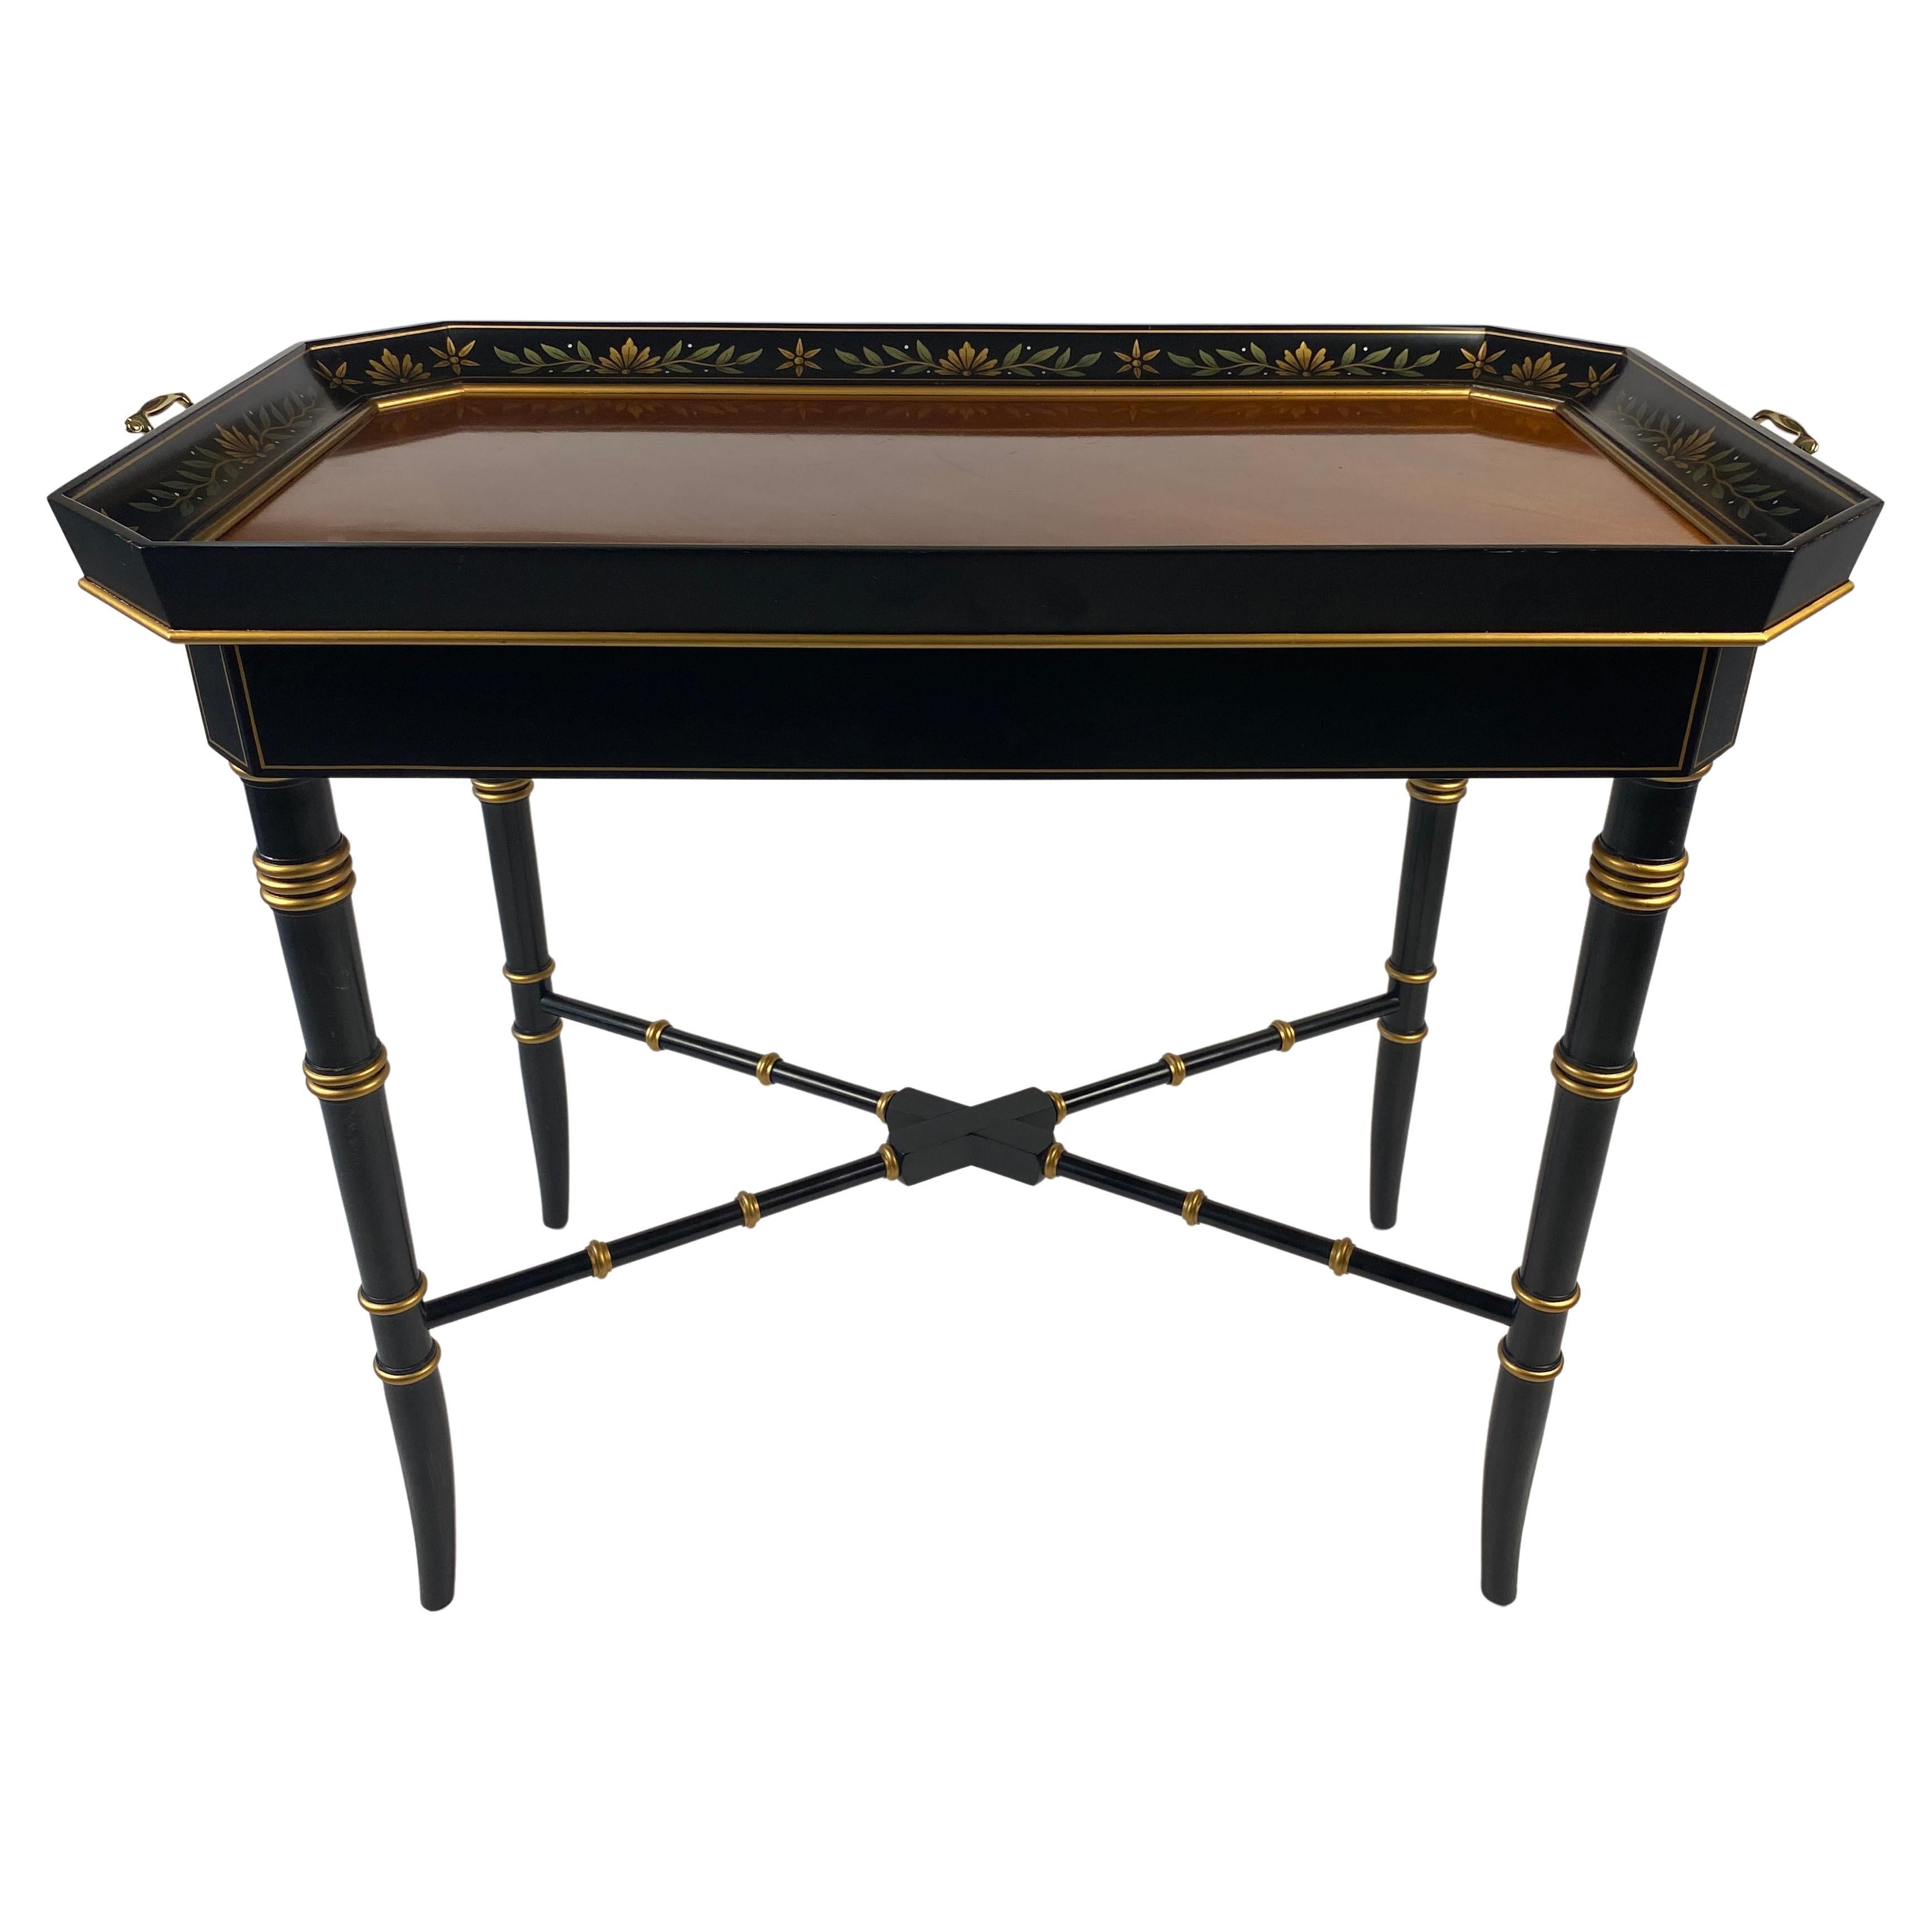 Black and Gold Wooden Tray Table Bamboo Style Legs